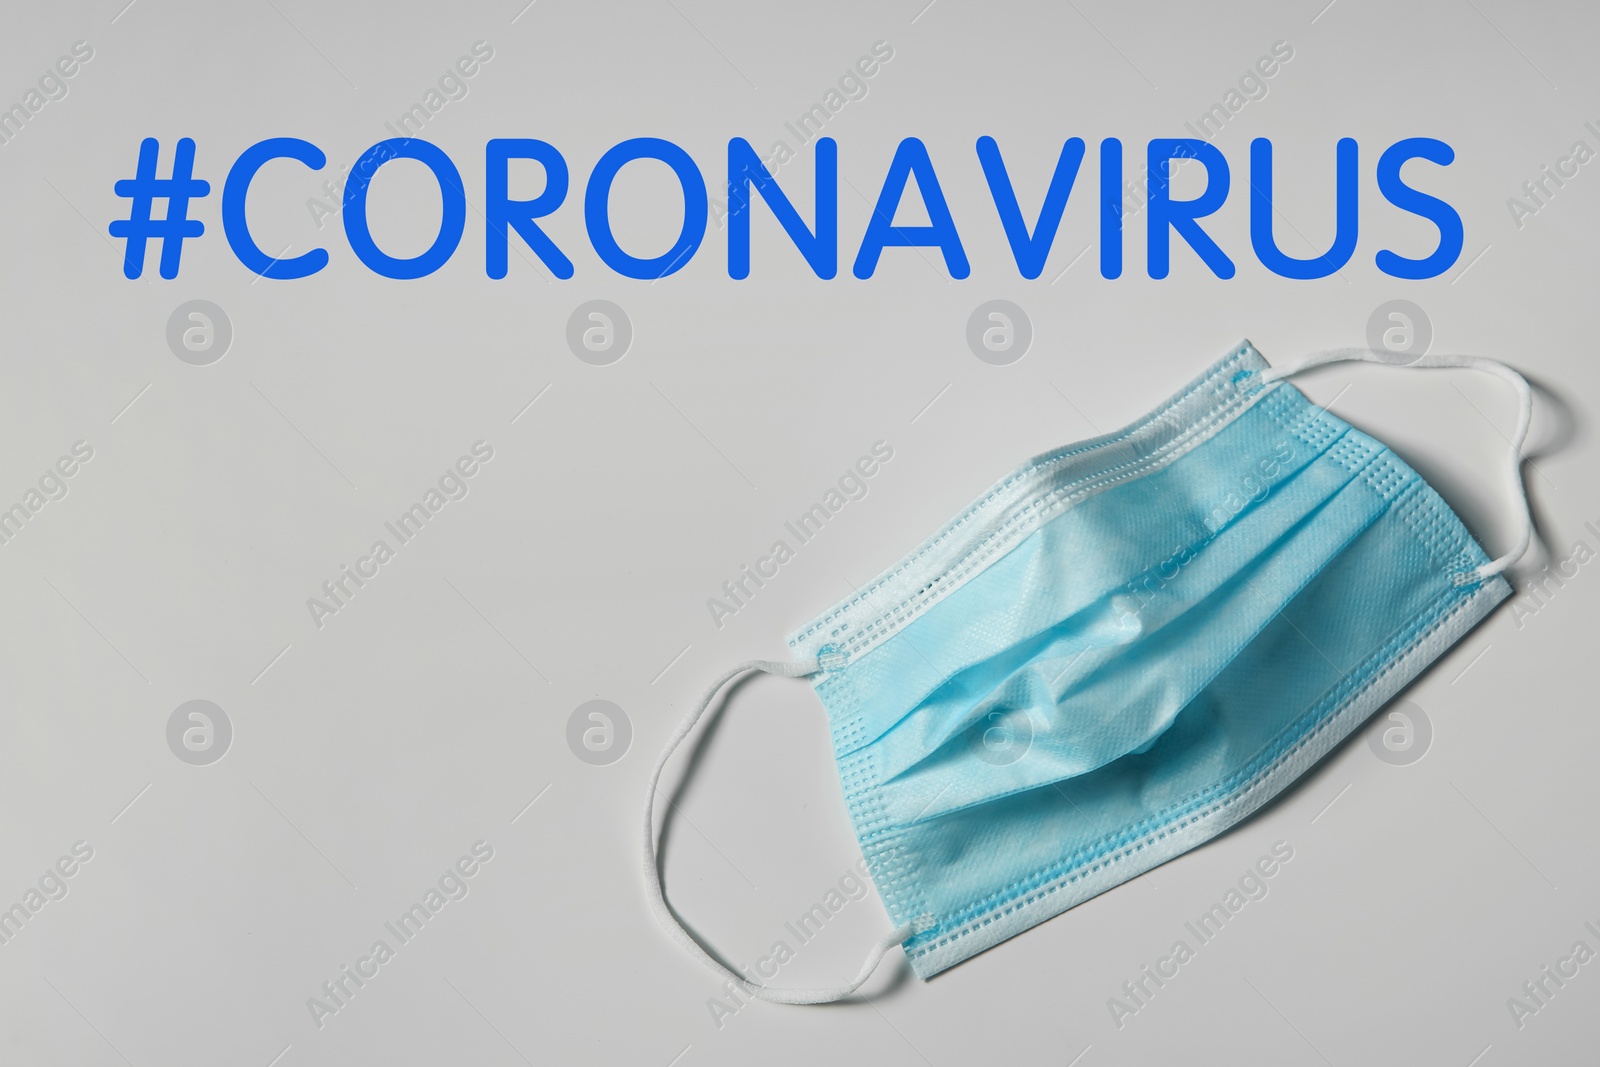 Image of Hashtag Coronavirus and medical mask on light background, top view